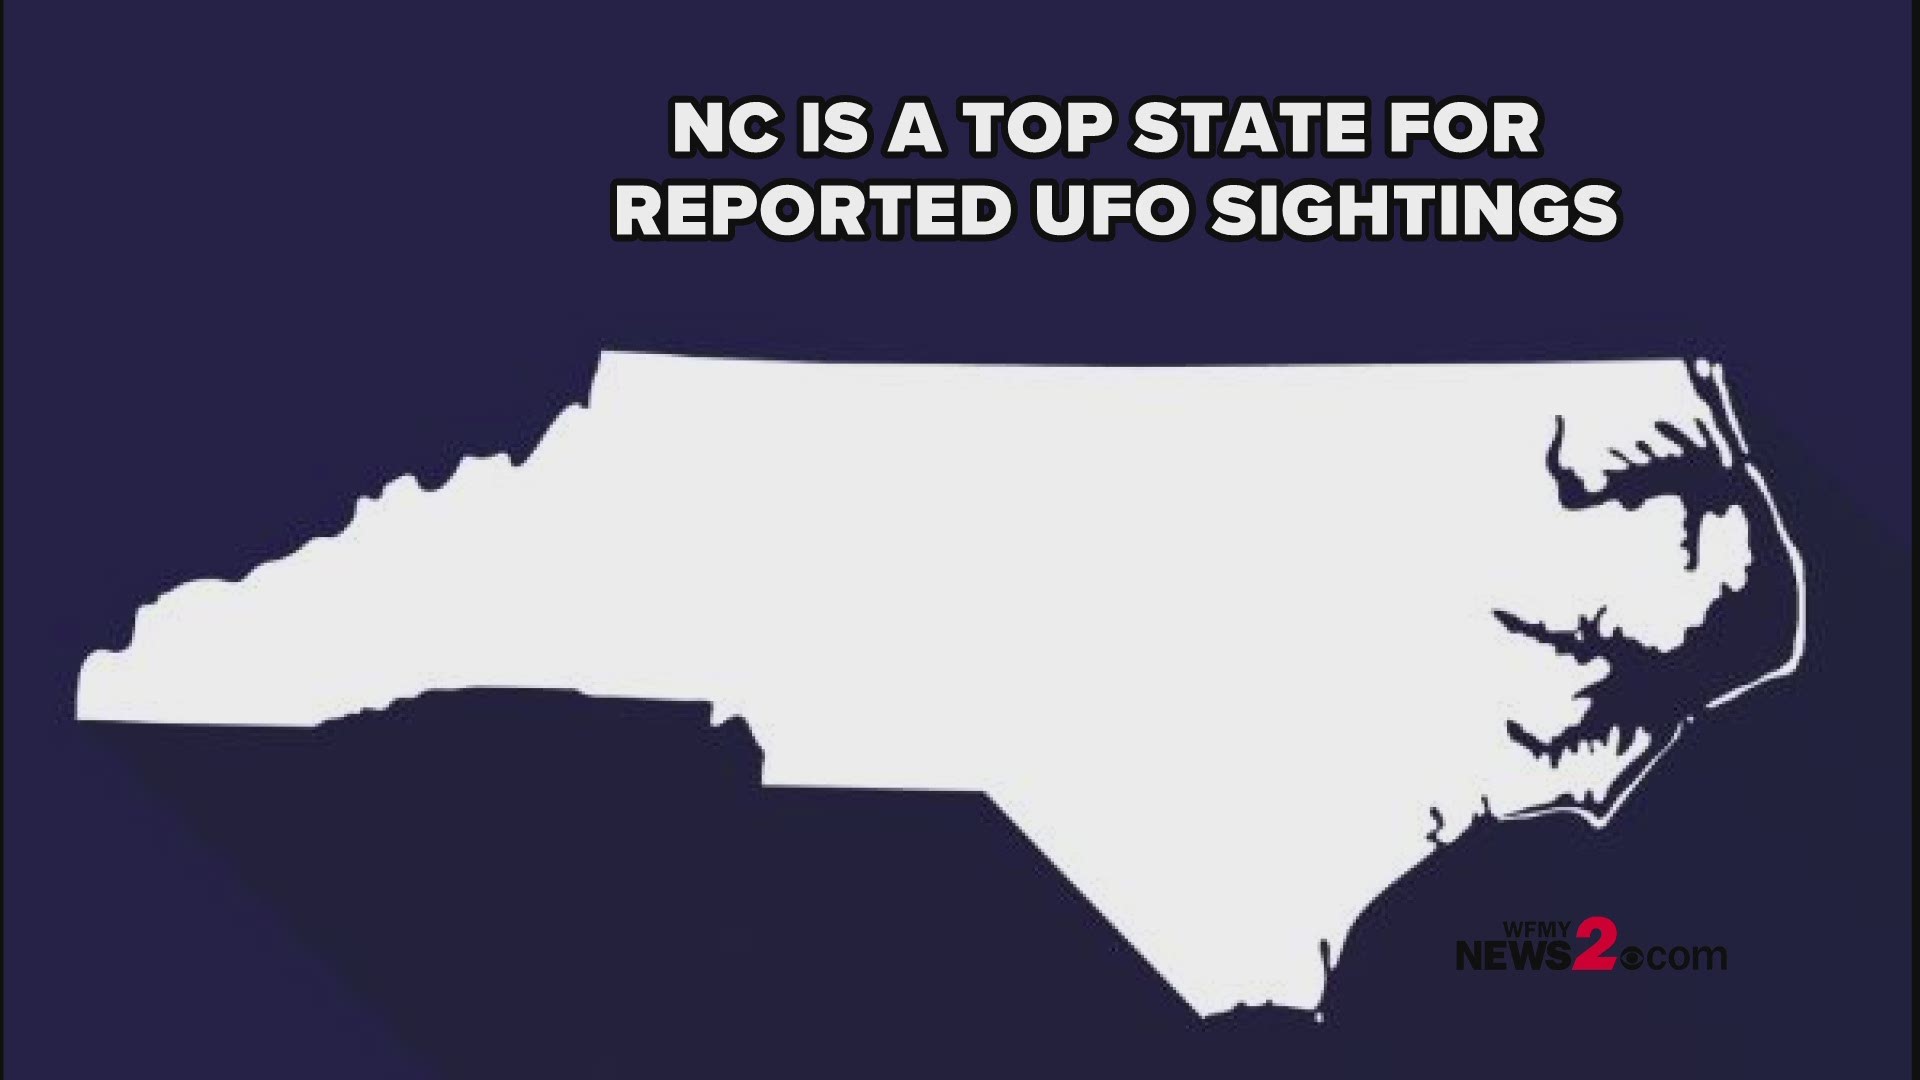 It’s truly out of this world! North Carolina ranks among the top ten for reported UFO sightings according to the National UFO Network.